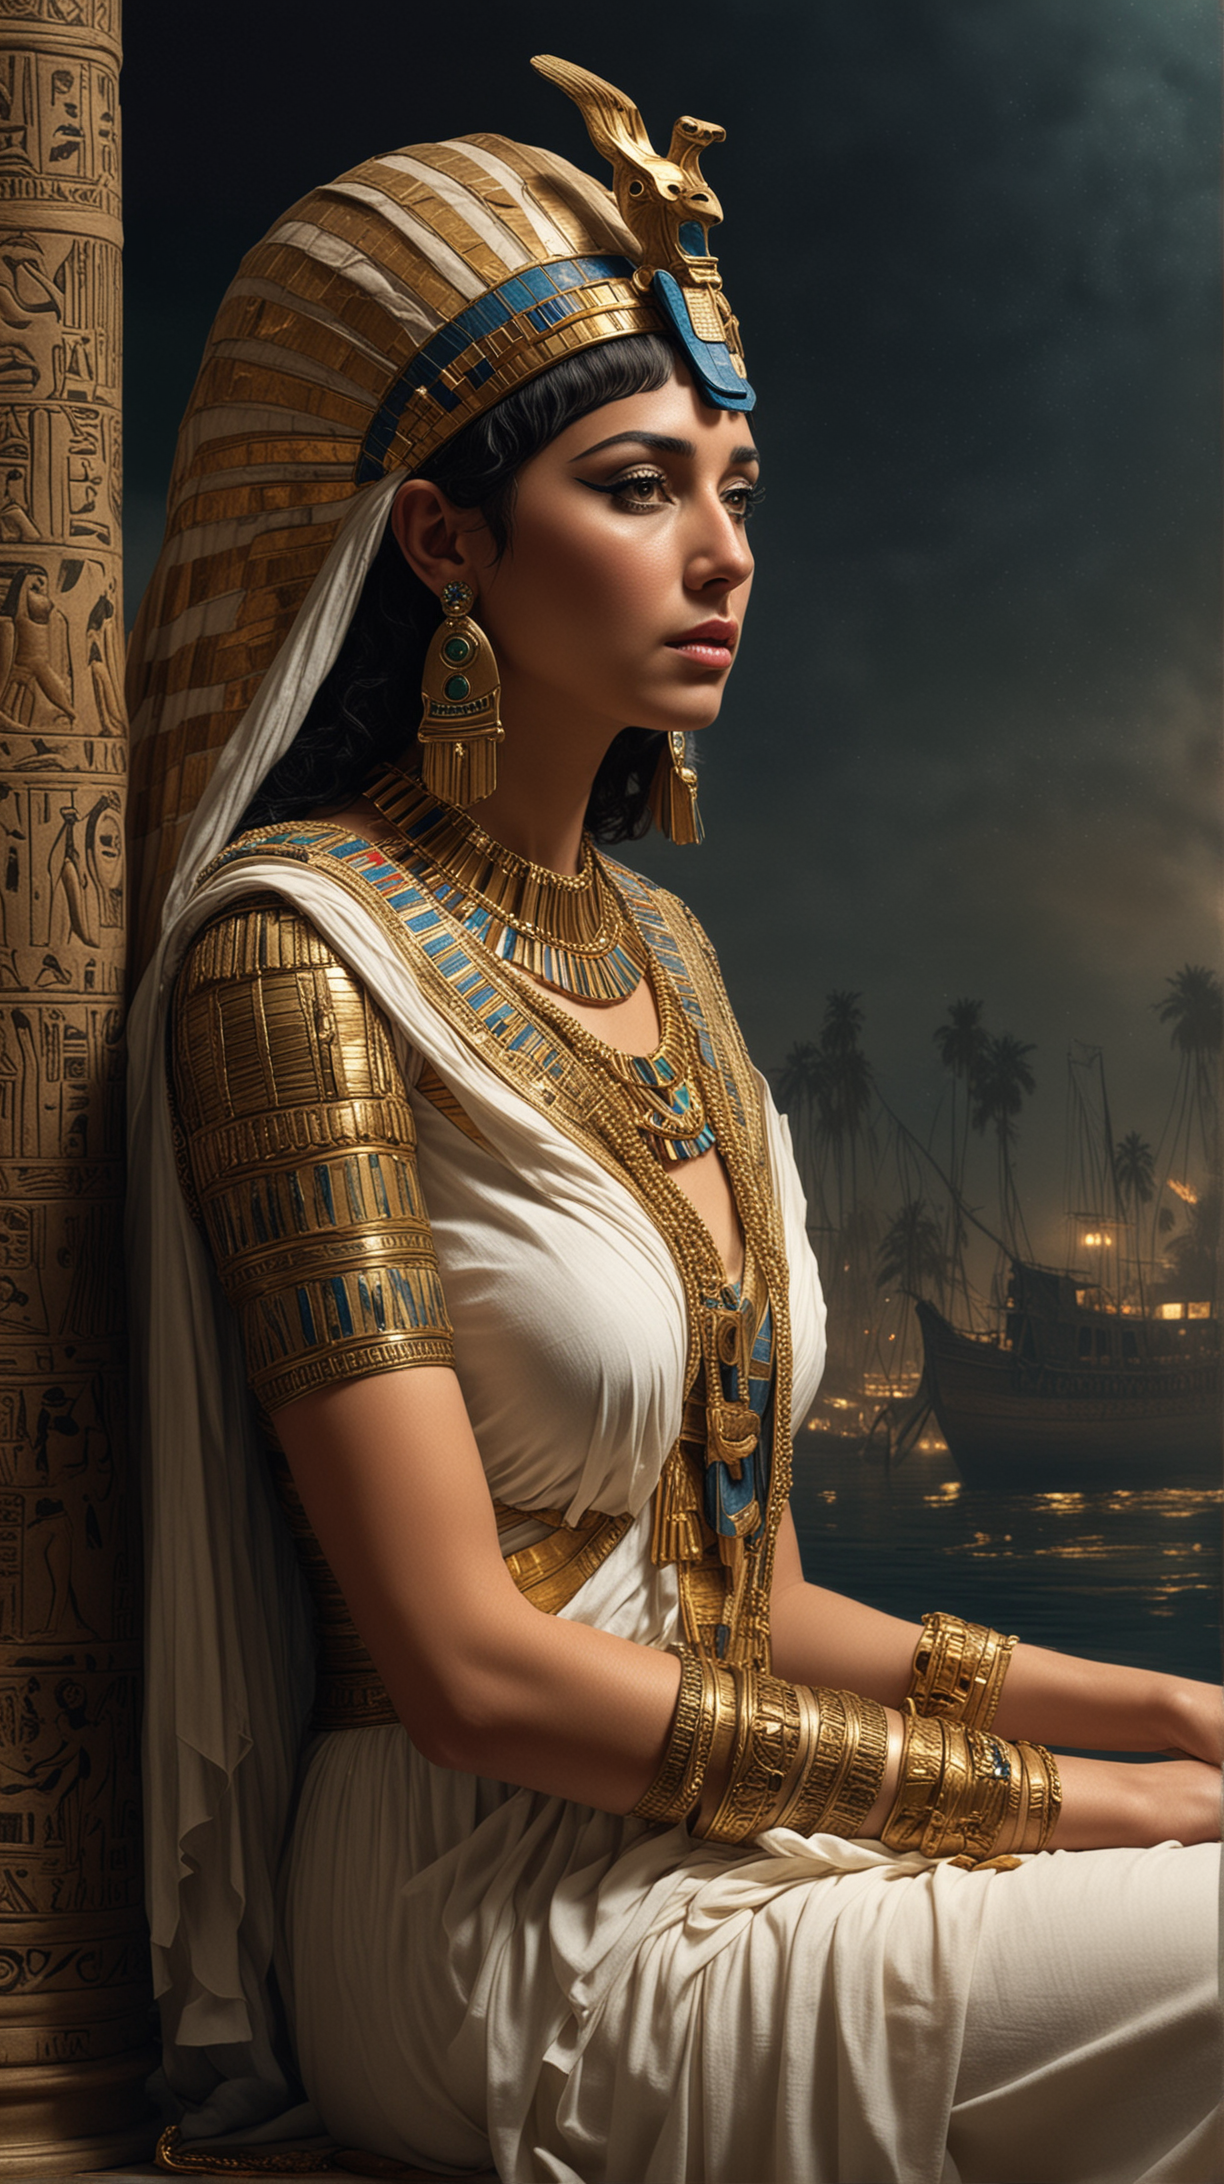 During a treacherous voyage down the Nile, Cleopatra, adorned in her royal regalia, contemplates the weight of her dynasty's legacy amidst the whispers of betrayal echoing across the waters" hyper realistic